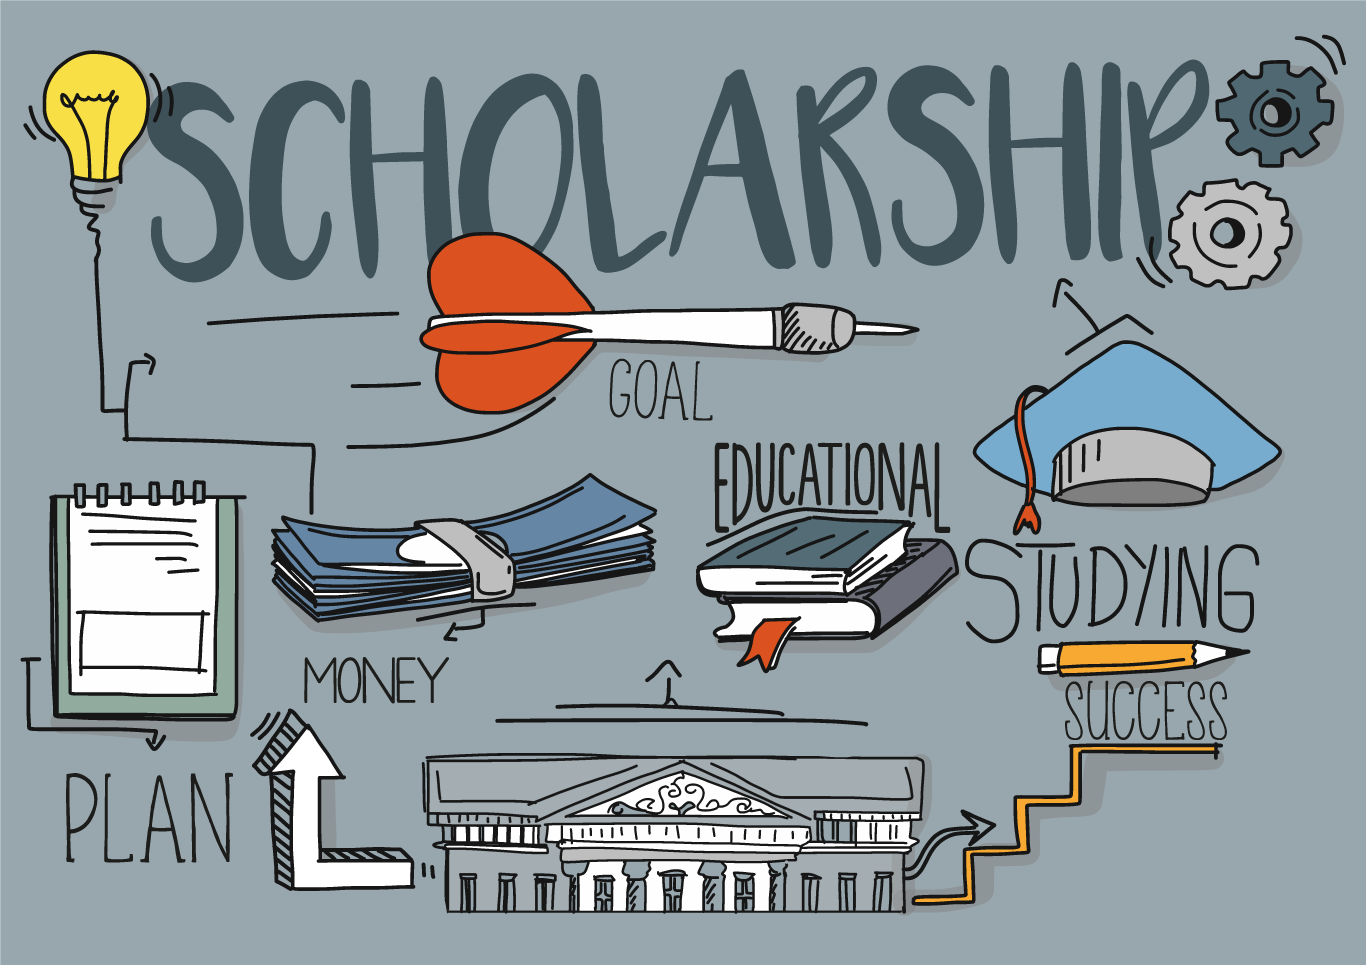 November Scholarship Month: Preparing the next generation with support